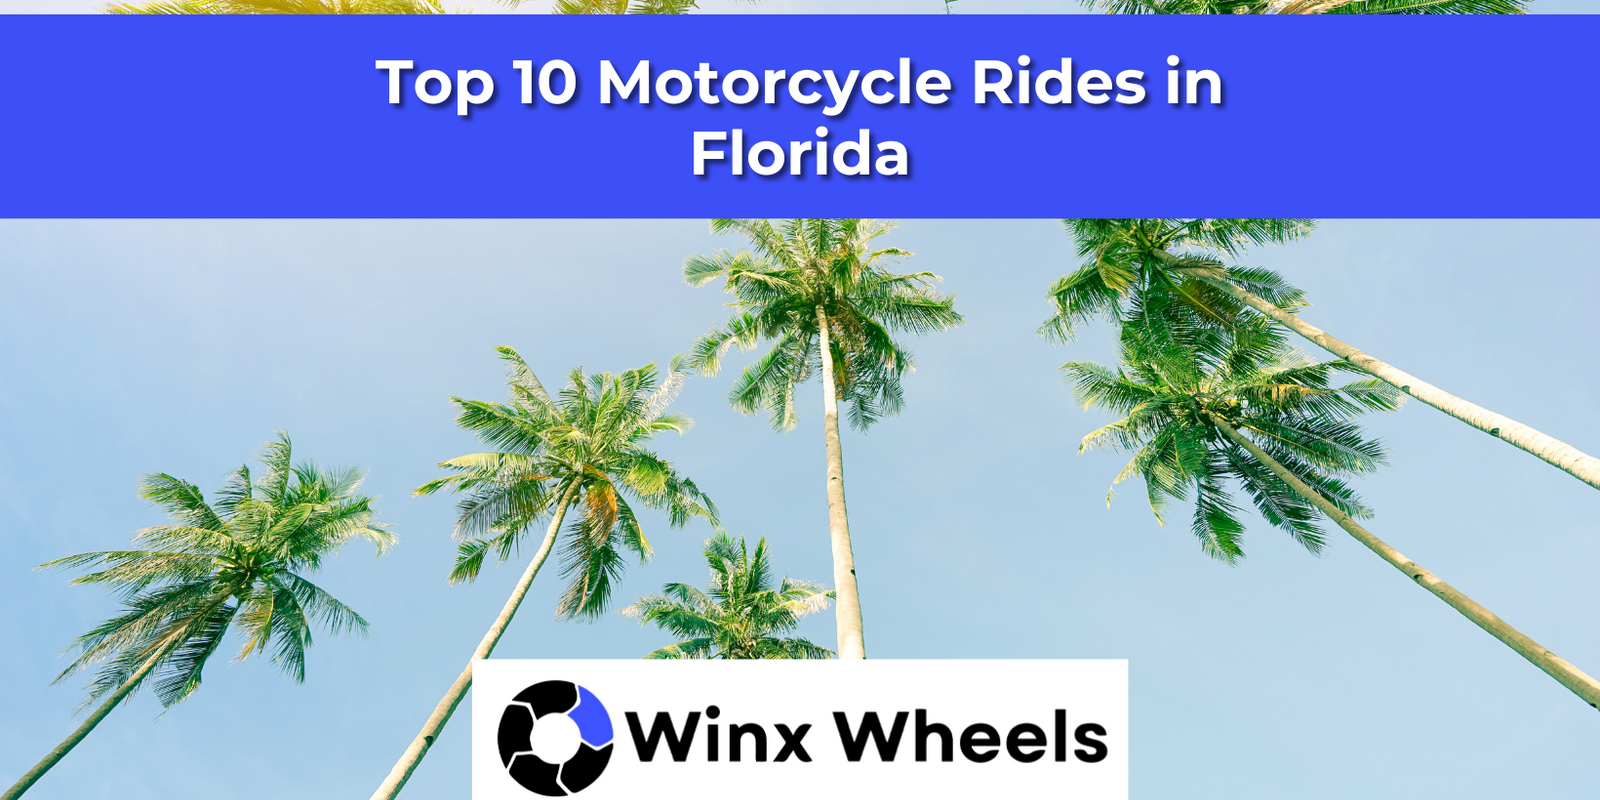 Top 10 Motorcycle Rides in Florida